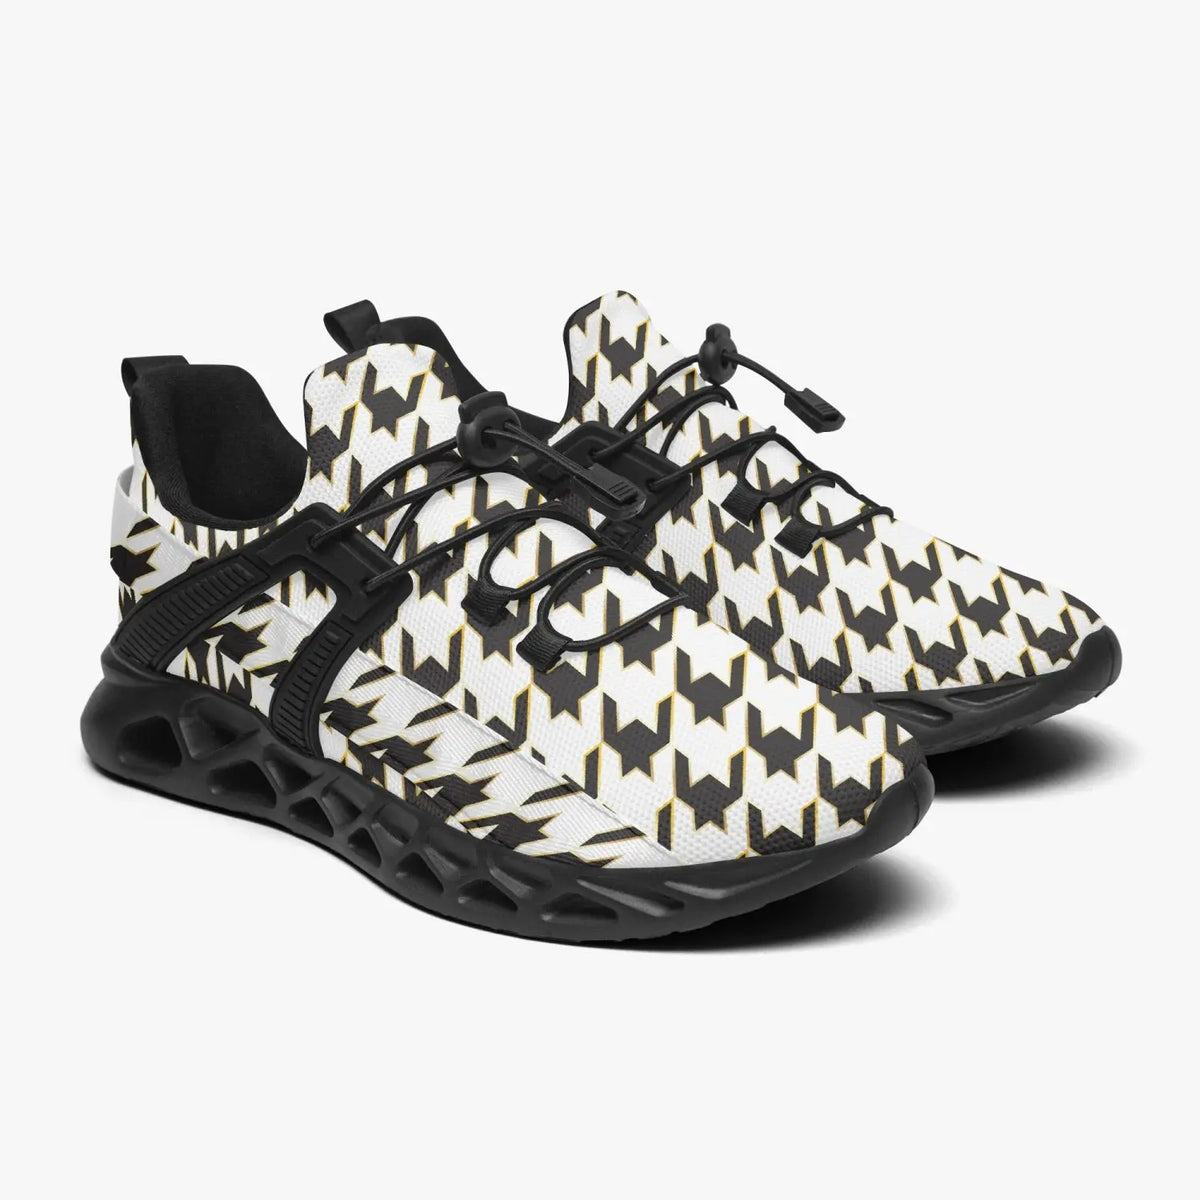 Unisex Houndstooth Running Shoes - The Sherlock Holmes Company